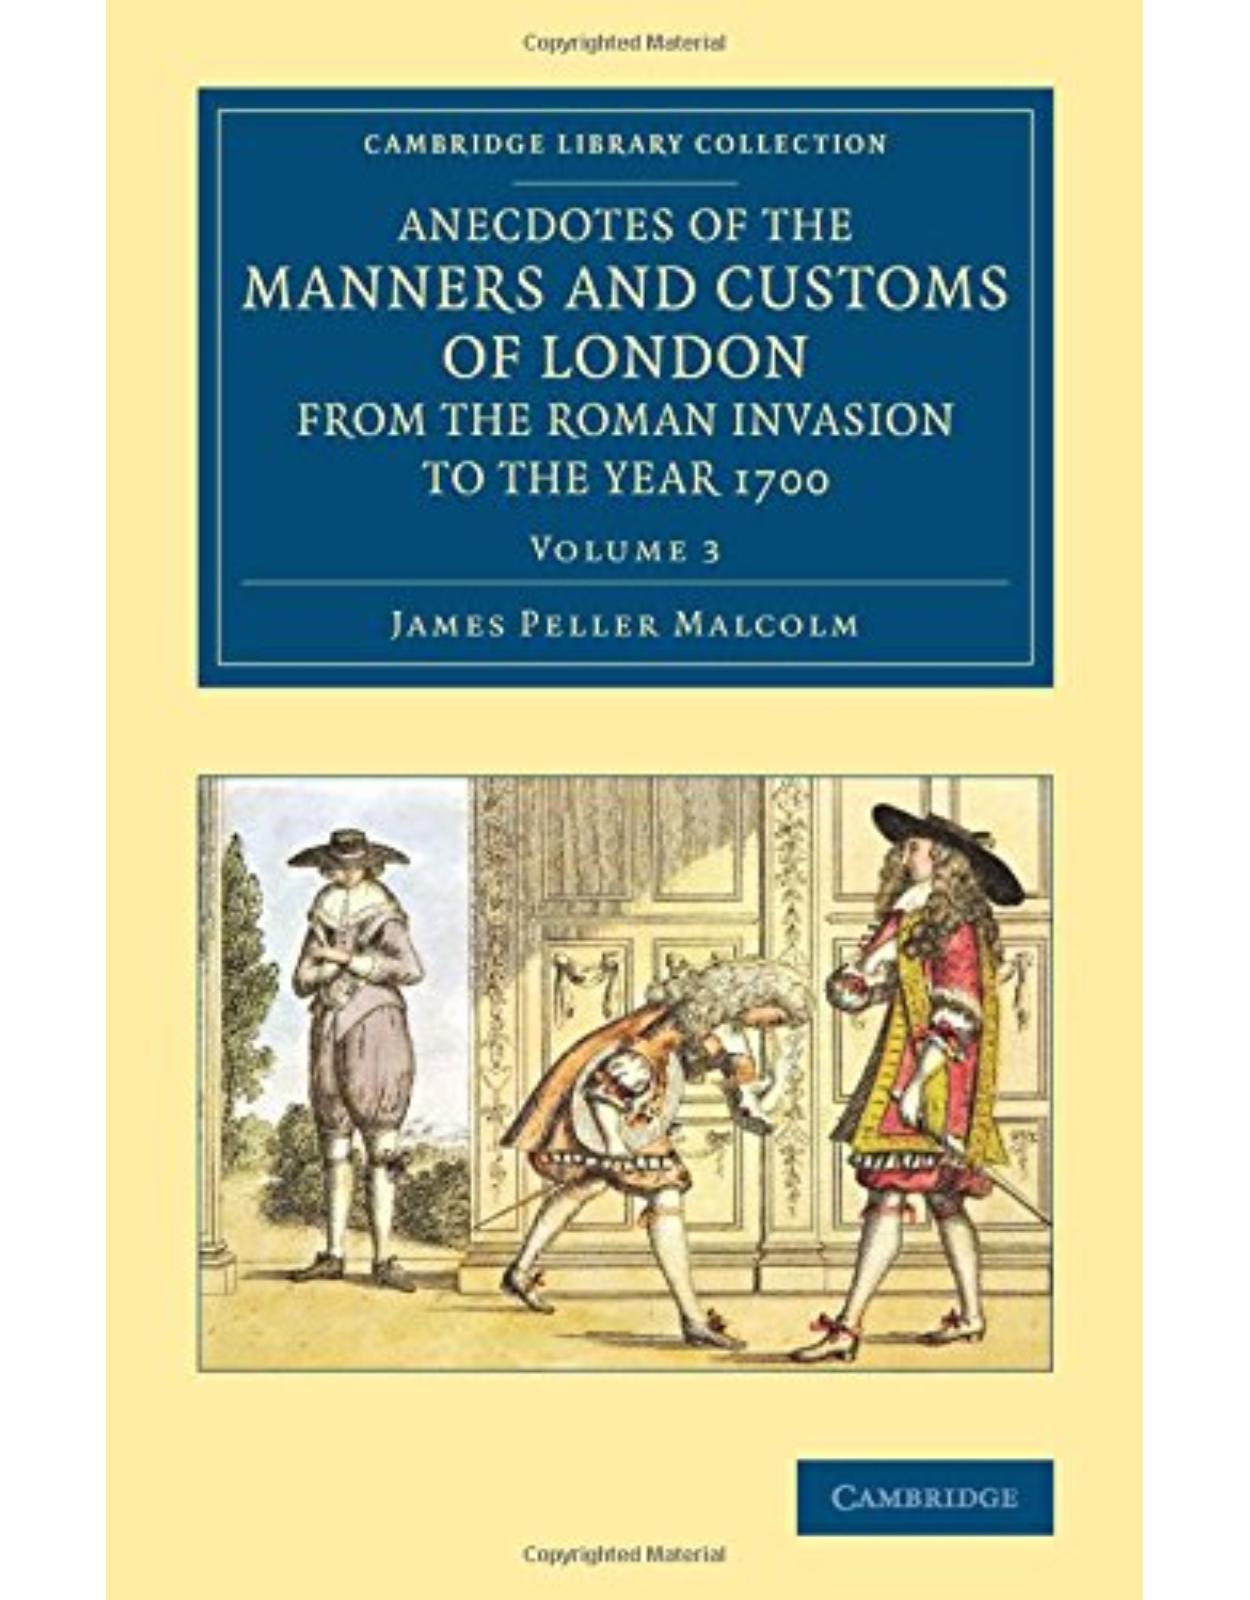 Anecdotes of the Manners and Customs of London from the Roman Invasion to the Year 1700: Volume 3 (Cambridge Library Collection - British and Irish History, General)